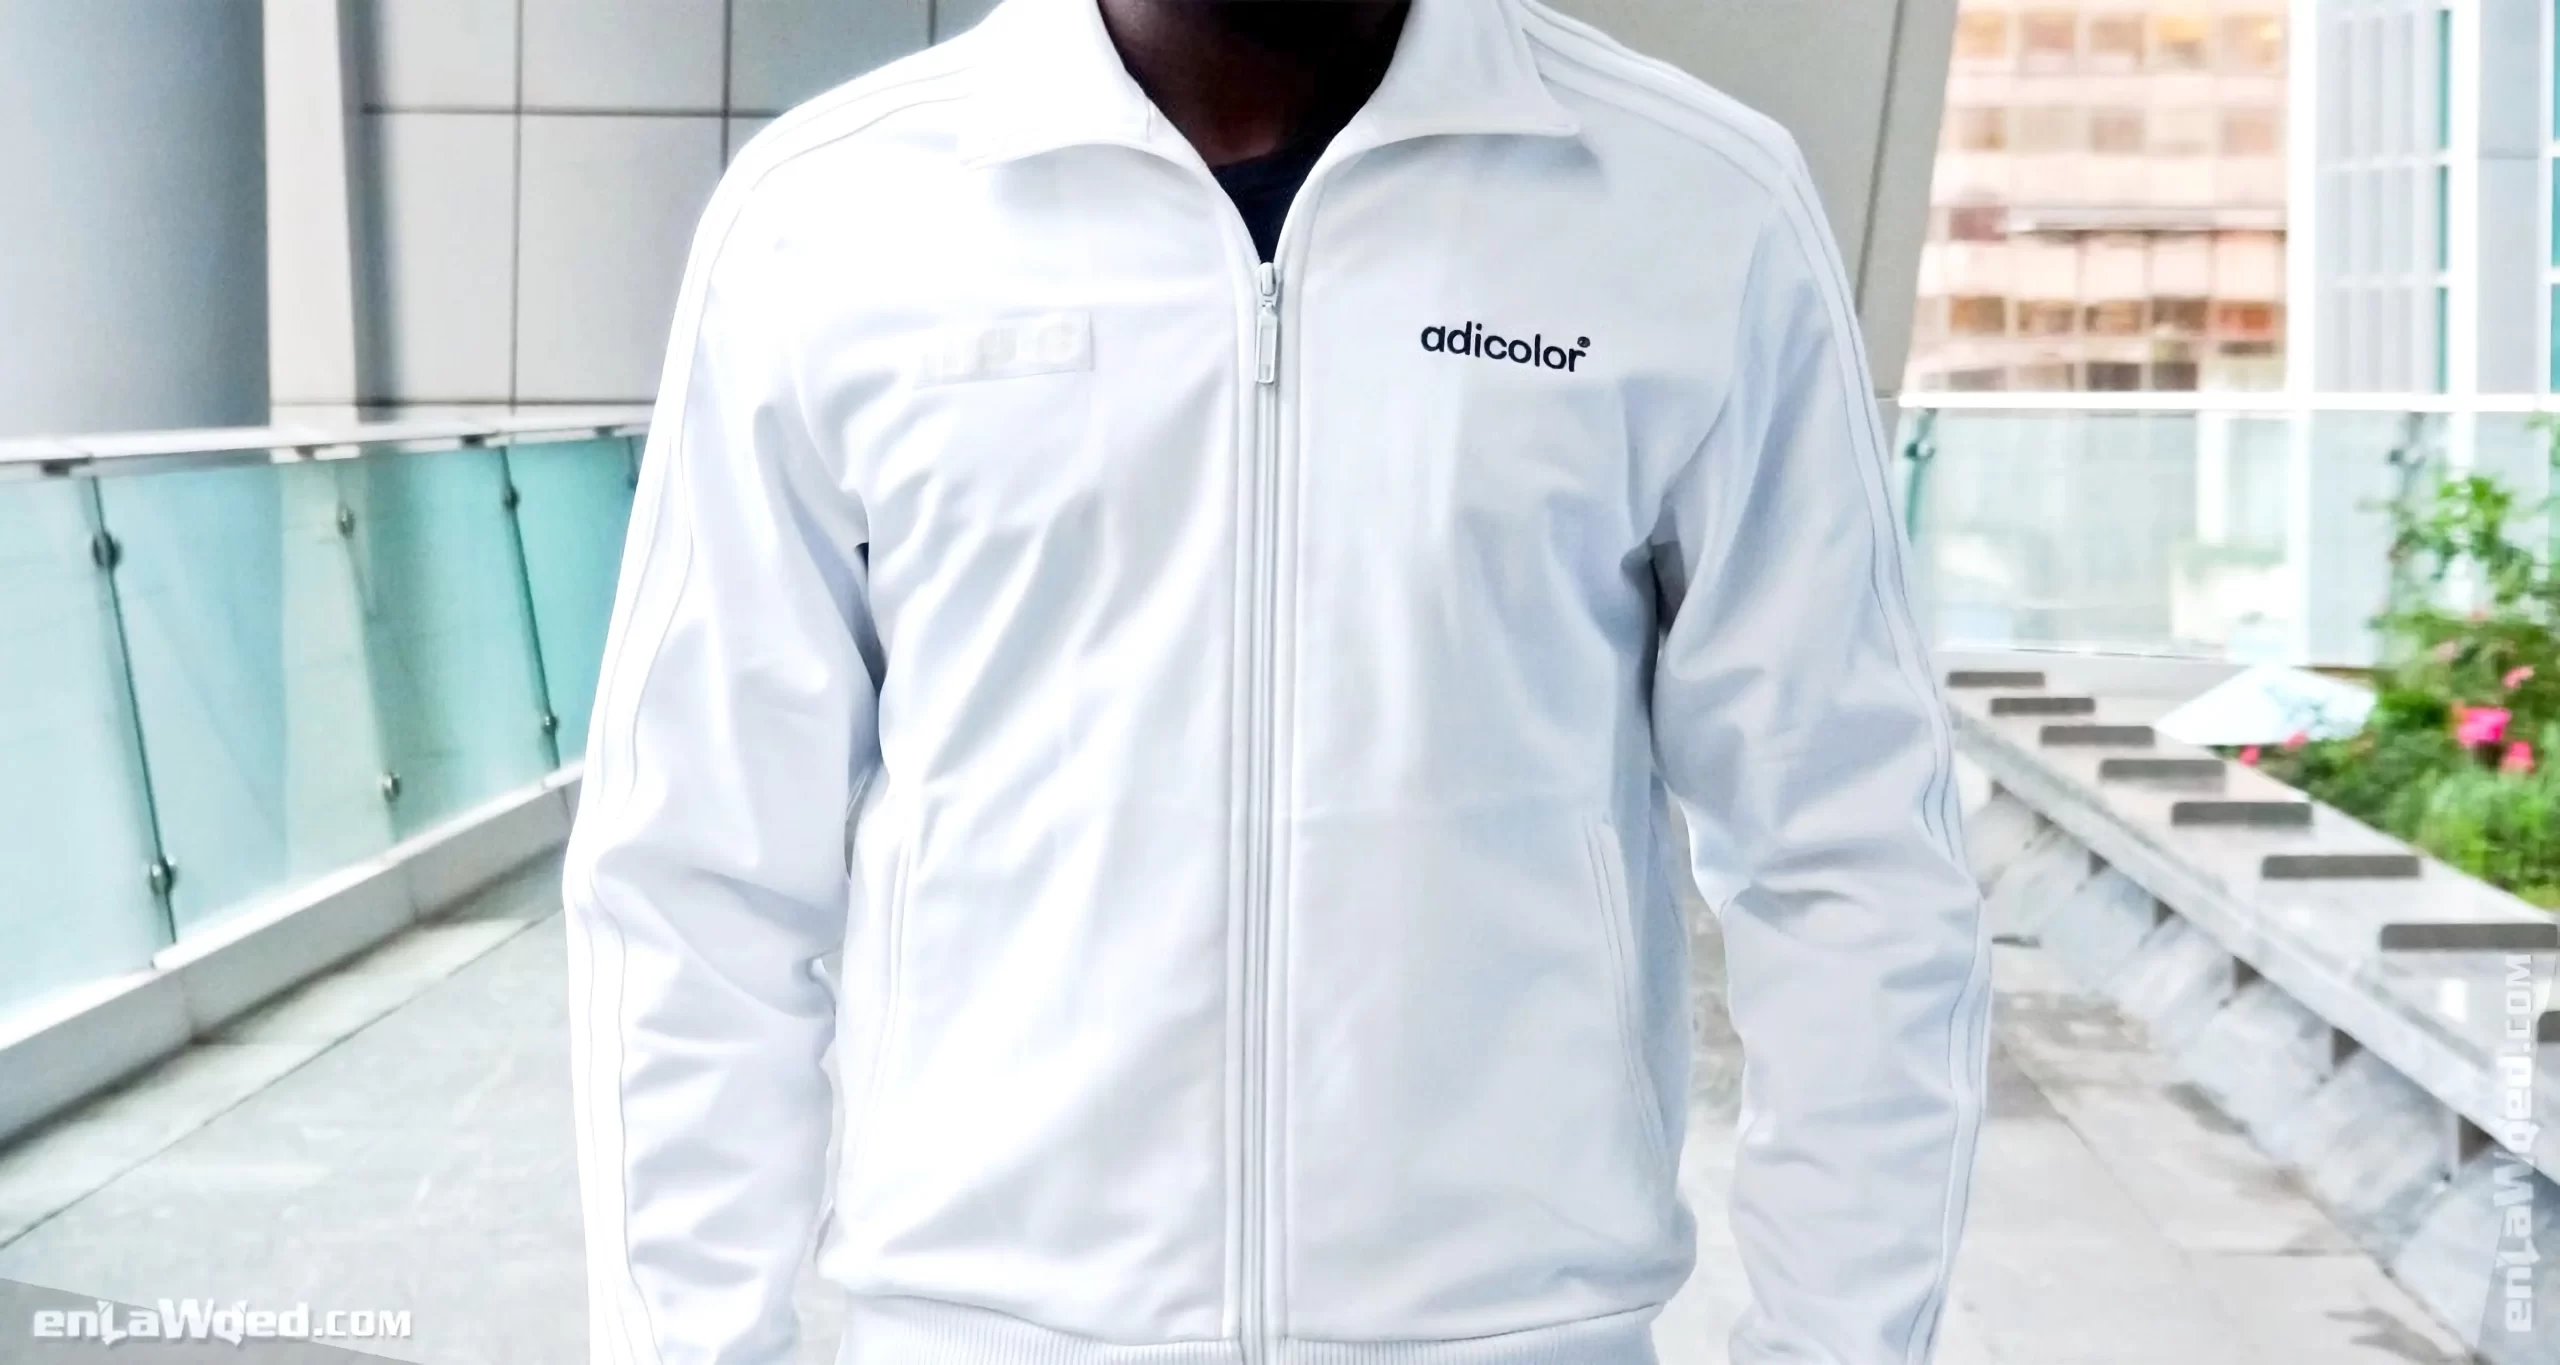 Men’s 2006 Adicolor W6 NYC Track Top by Adidas + Bill McMullen: Naked (EnLawded.com file #lmcgm3bz1s5gc87ncau)